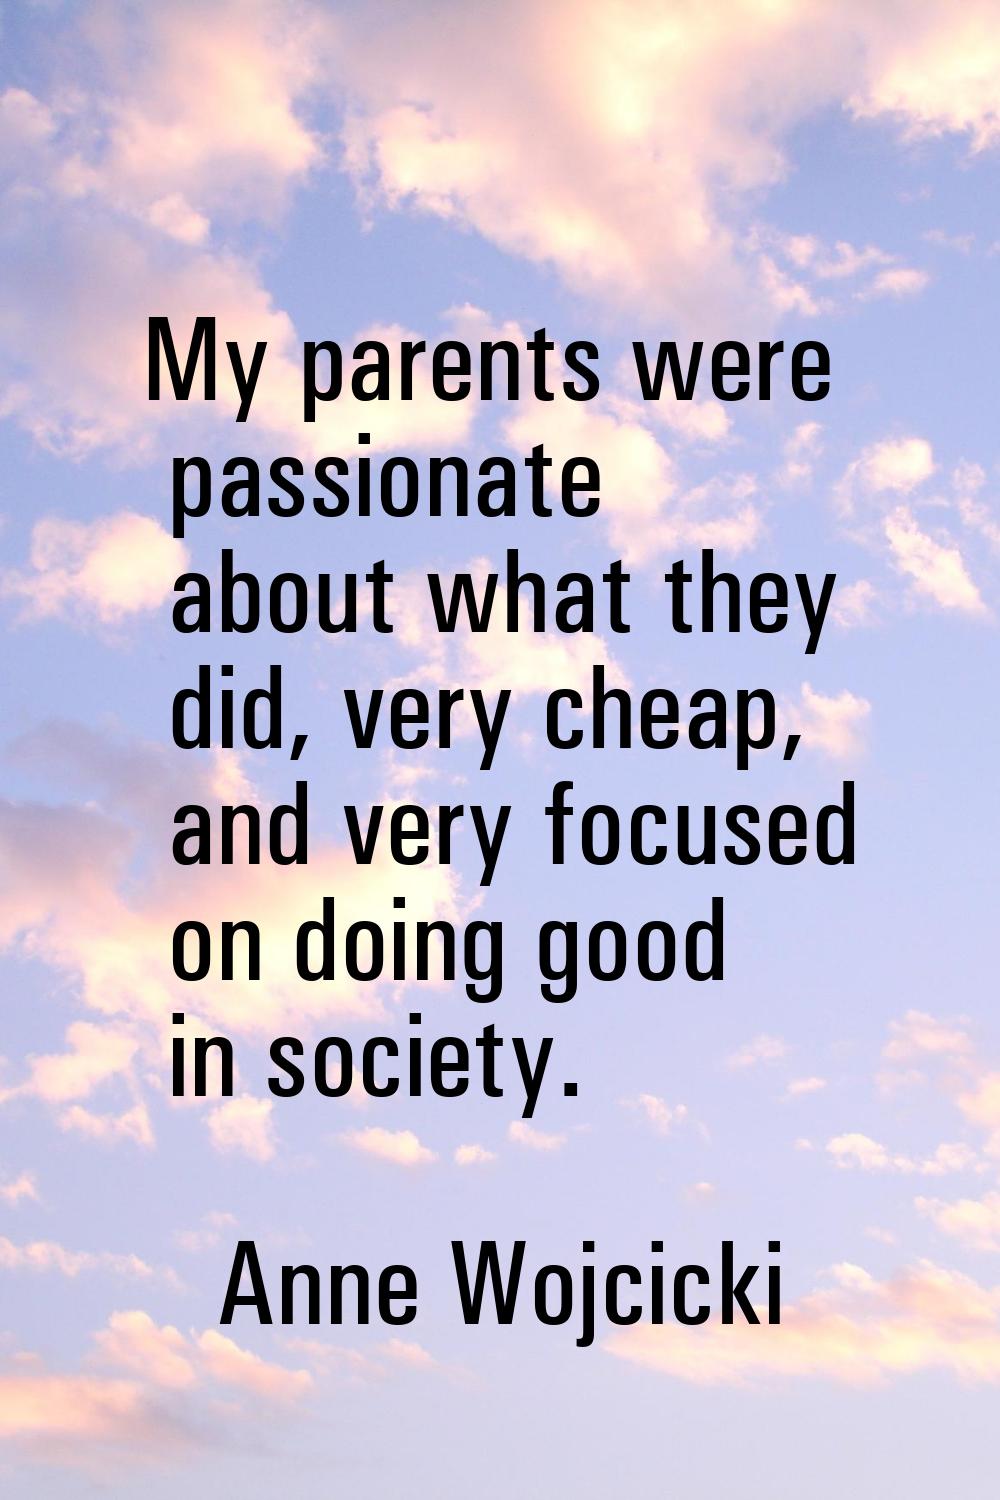 My parents were passionate about what they did, very cheap, and very focused on doing good in socie